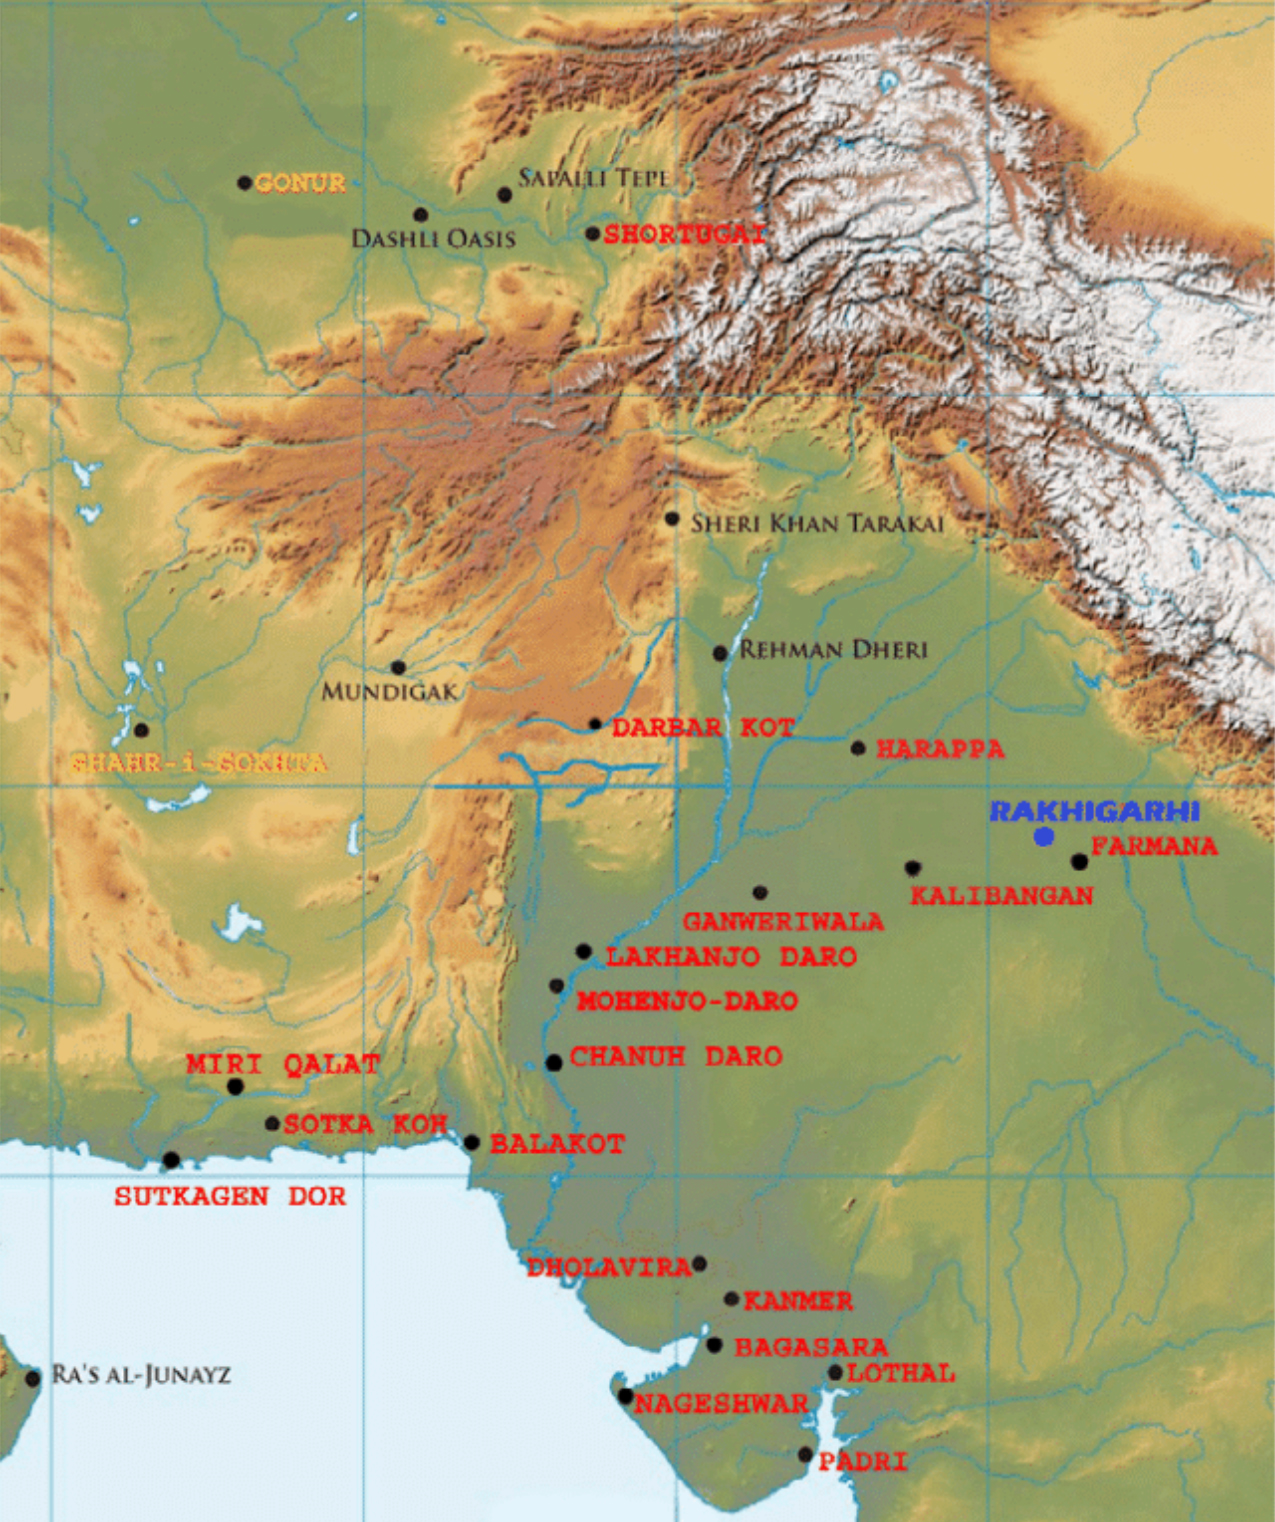 Map of the Indus Valley Civilisation and other significant Harappan sites. (Shinde et al. Cell, 2019)